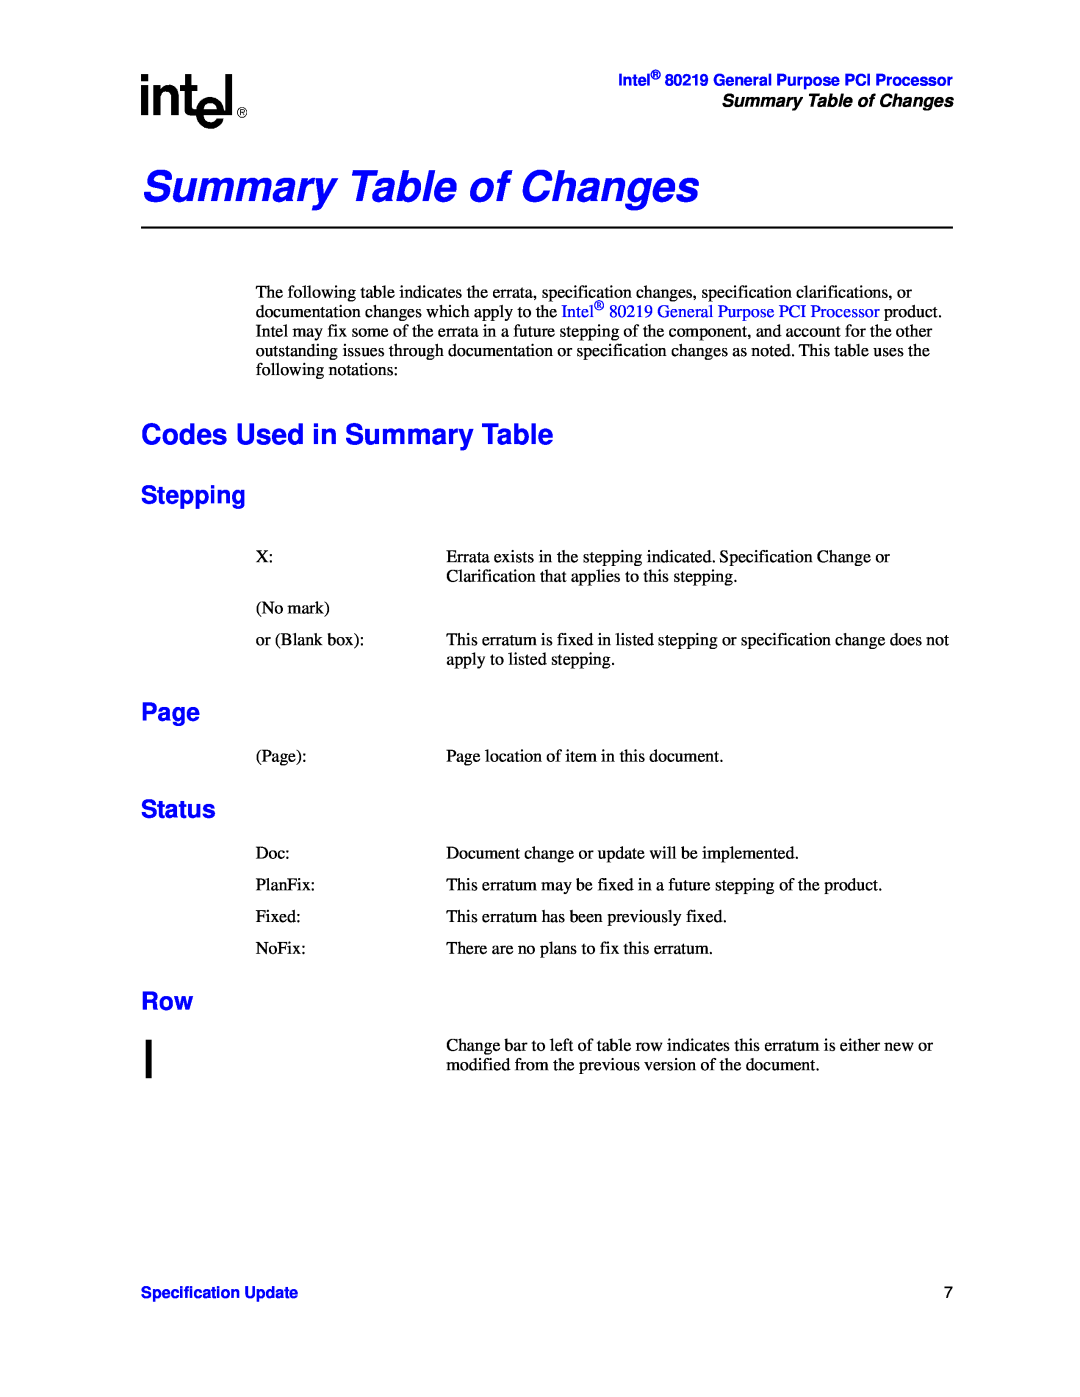 Intel 80219 specifications Summary Table of Changes, Codes Used in Summary Table, Stepping, Page, Status 